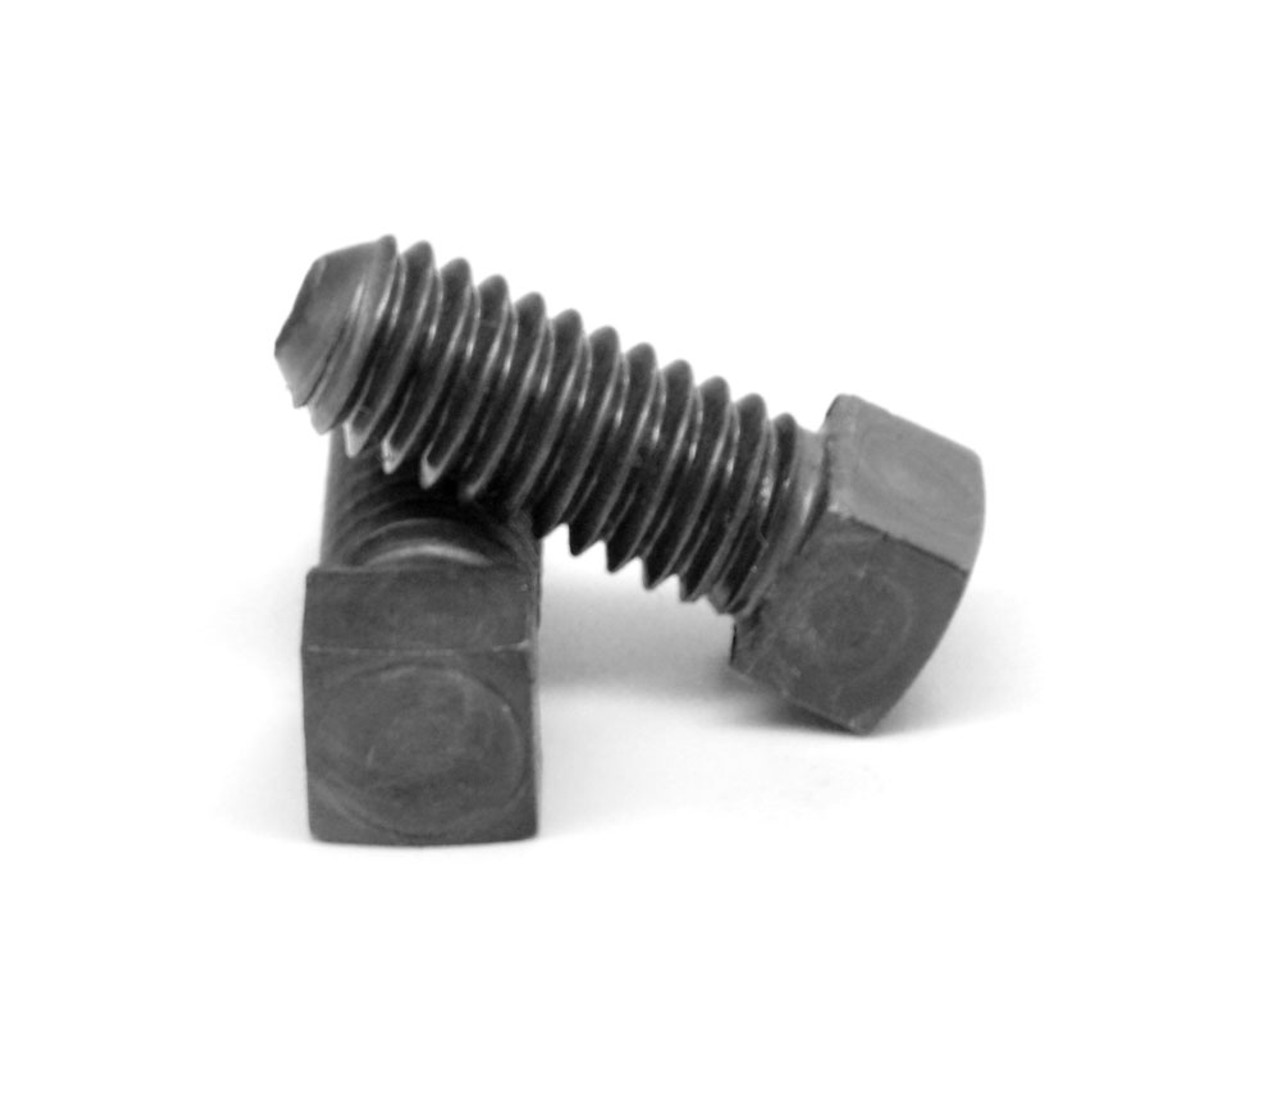 5/16"-18 x 3/4" (FT) Coarse Thread Square Head Set Screw Cup Point Through Hardened Alloy Steel Plain Finish